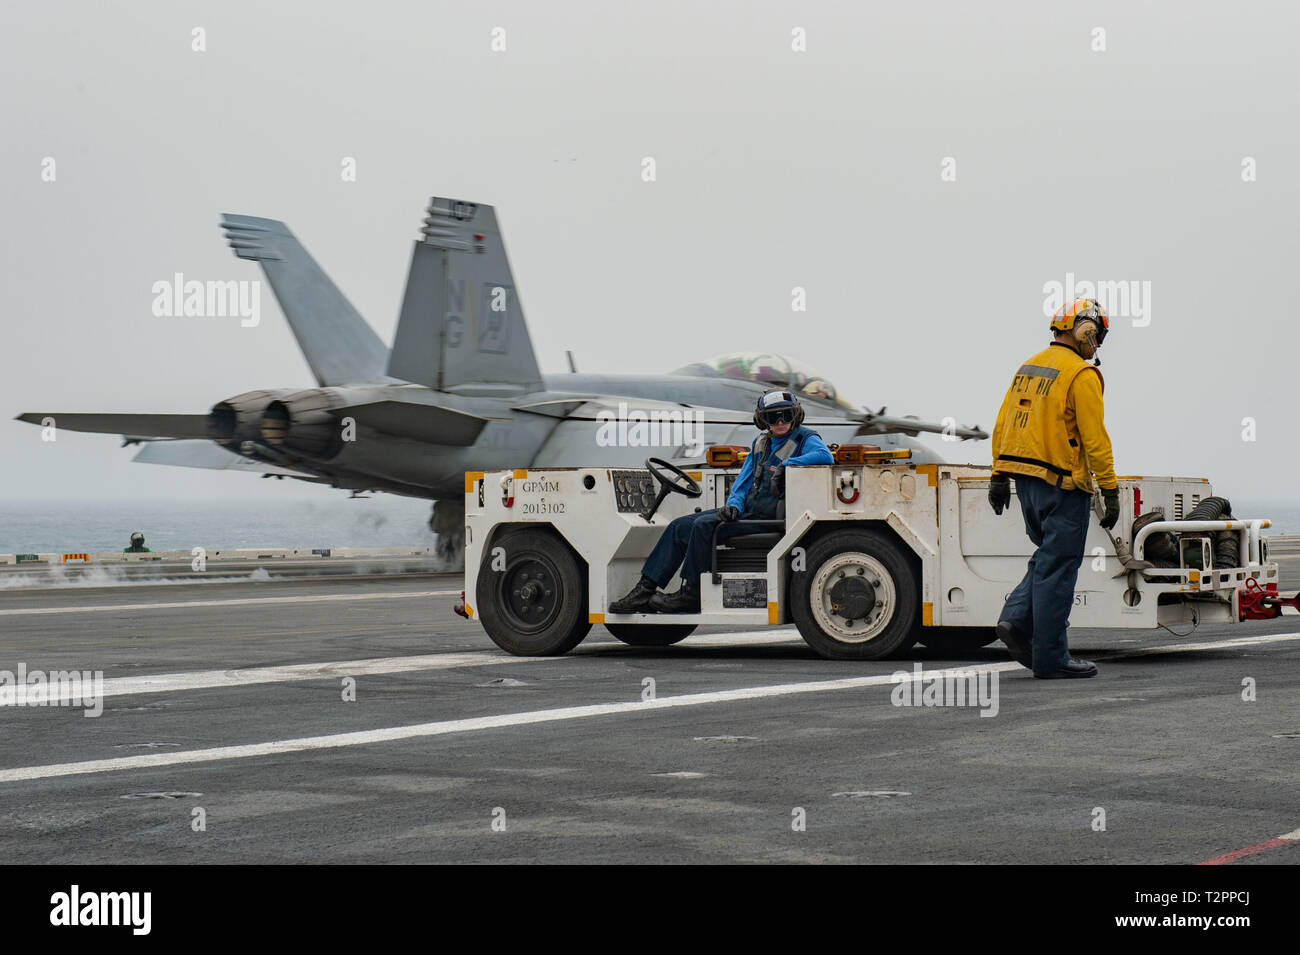 U.S. Sailors prepare to taxi aircraft as an F/A-18F Super Hornet, assigned to Strike Fighter Squadron (VFA) 41, launches from the flight deck of the aircraft carrier USS John C. Stennis (CVN 74) in the Arabian Gulf, April 1, 2019. The John C. Stennis Carrier Strike Group is deployed to the U.S. 5th Fleet area of operations in support of naval operations to ensure maritime stability and security in the Central Region, connecting the Mediterranean and the Pacific through the western Indian Ocean and three strategic choke points. (U.S. Navy photo by Mass Communication Specialist Seaman Jeffery L. Stock Photo